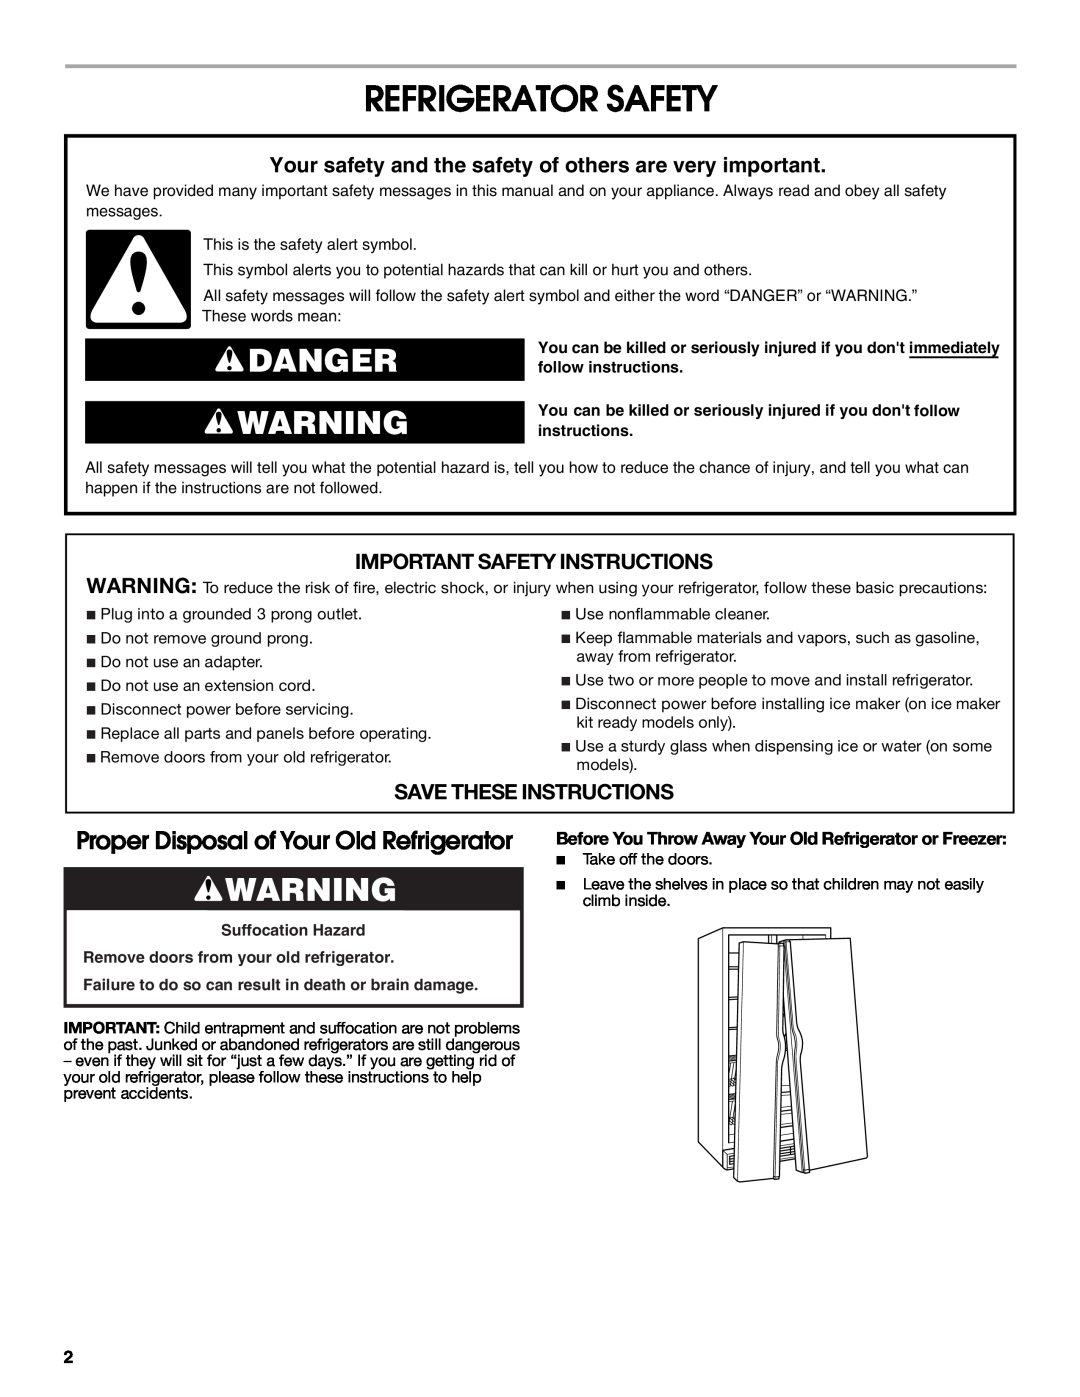 Whirlpool RS22AQXKQ00 Refrigerator Safety, Danger, Proper Disposal of Your Old Refrigerator, Important Safety Instructions 